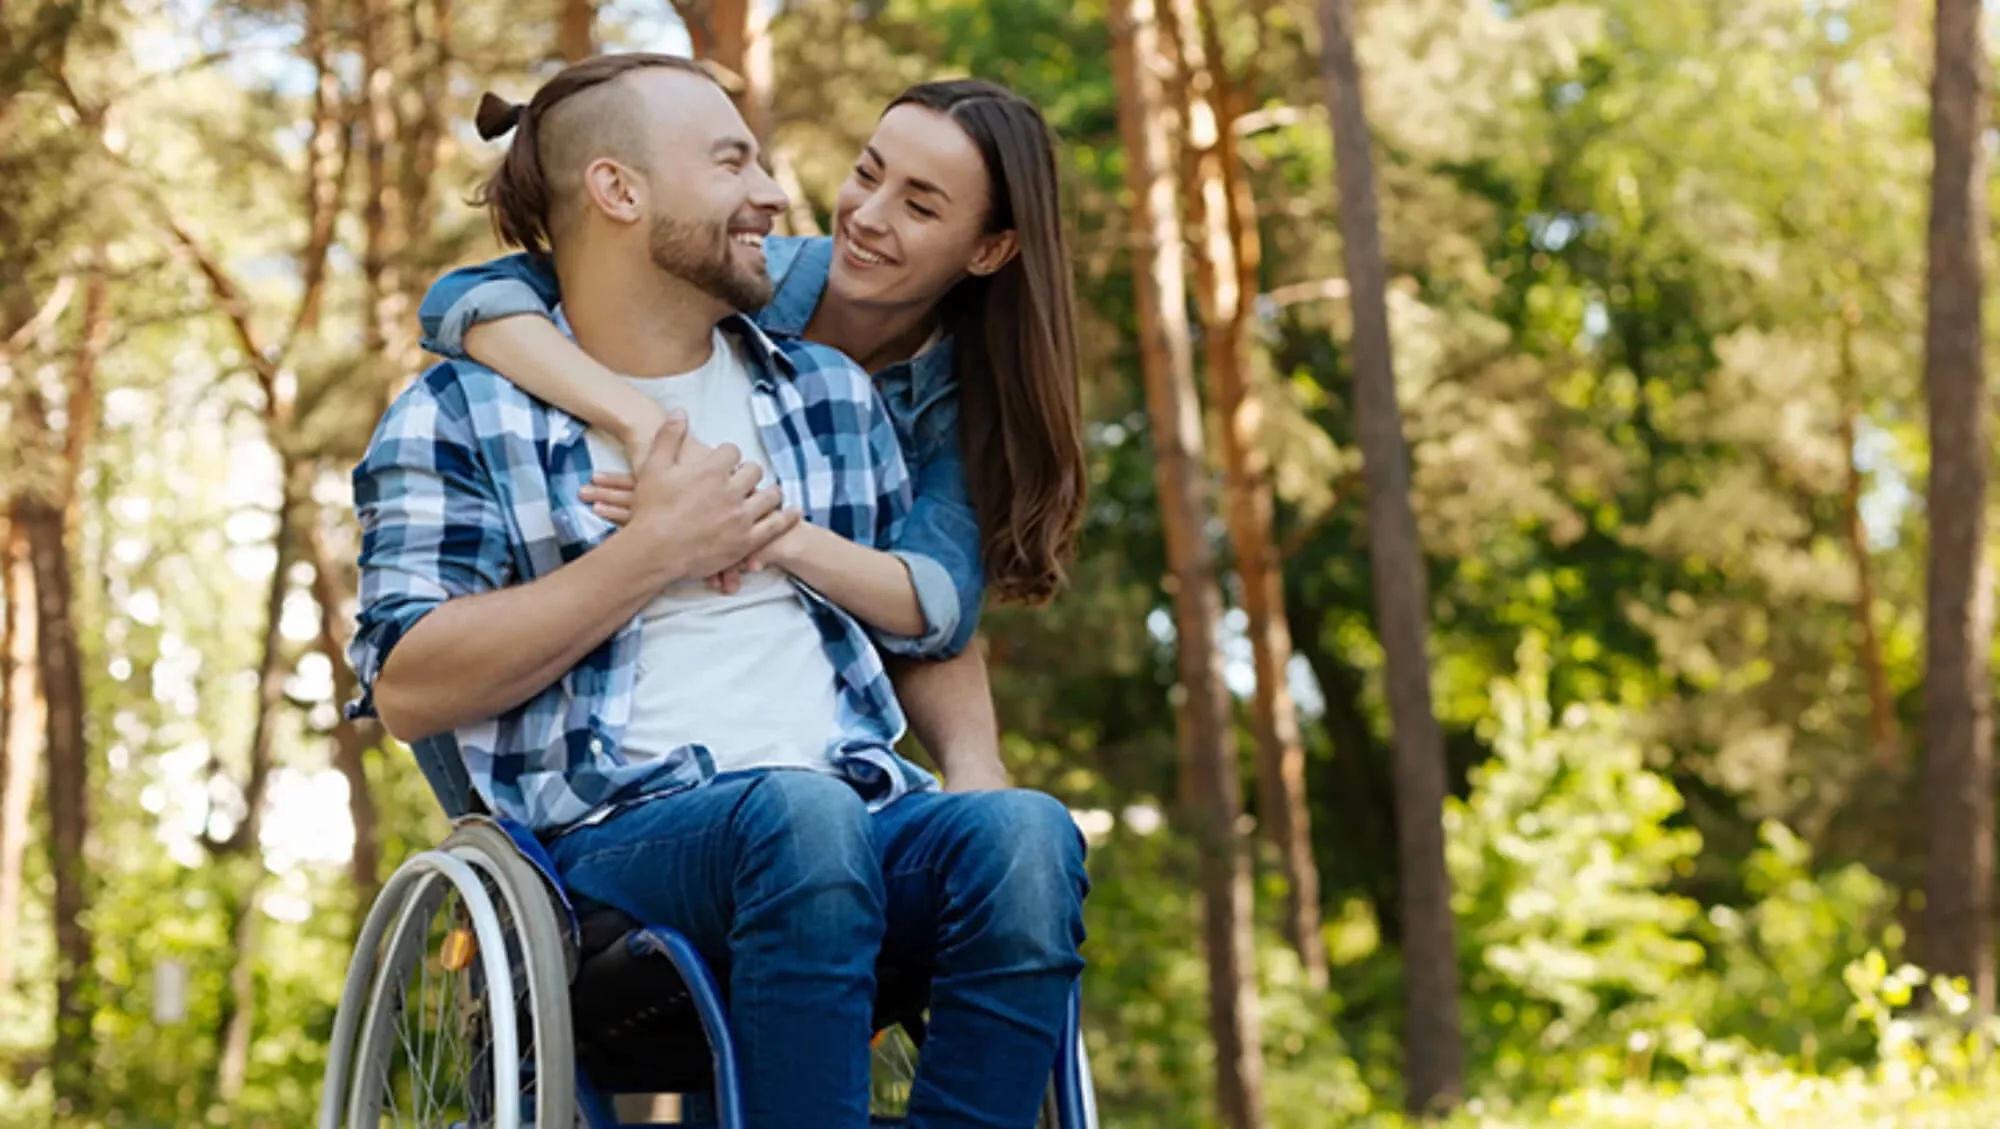 Woman hugging a man in a wheelchair from behind.